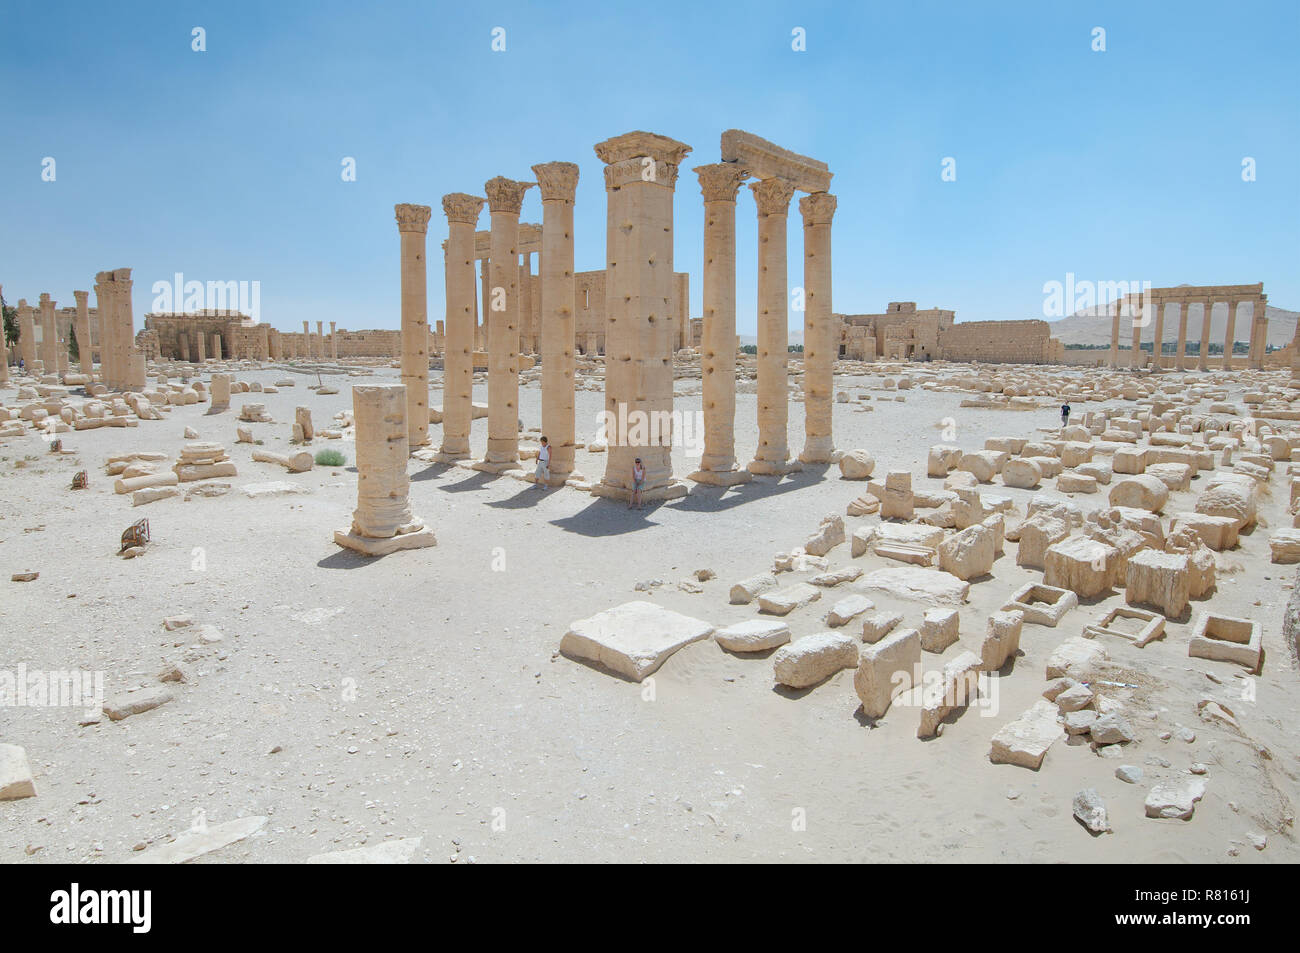 Ruins of the Temple of Bel in the ancient city of Palmyra, Tadmur, Palmyra District, Homs Governorate, Syria Stock Photo